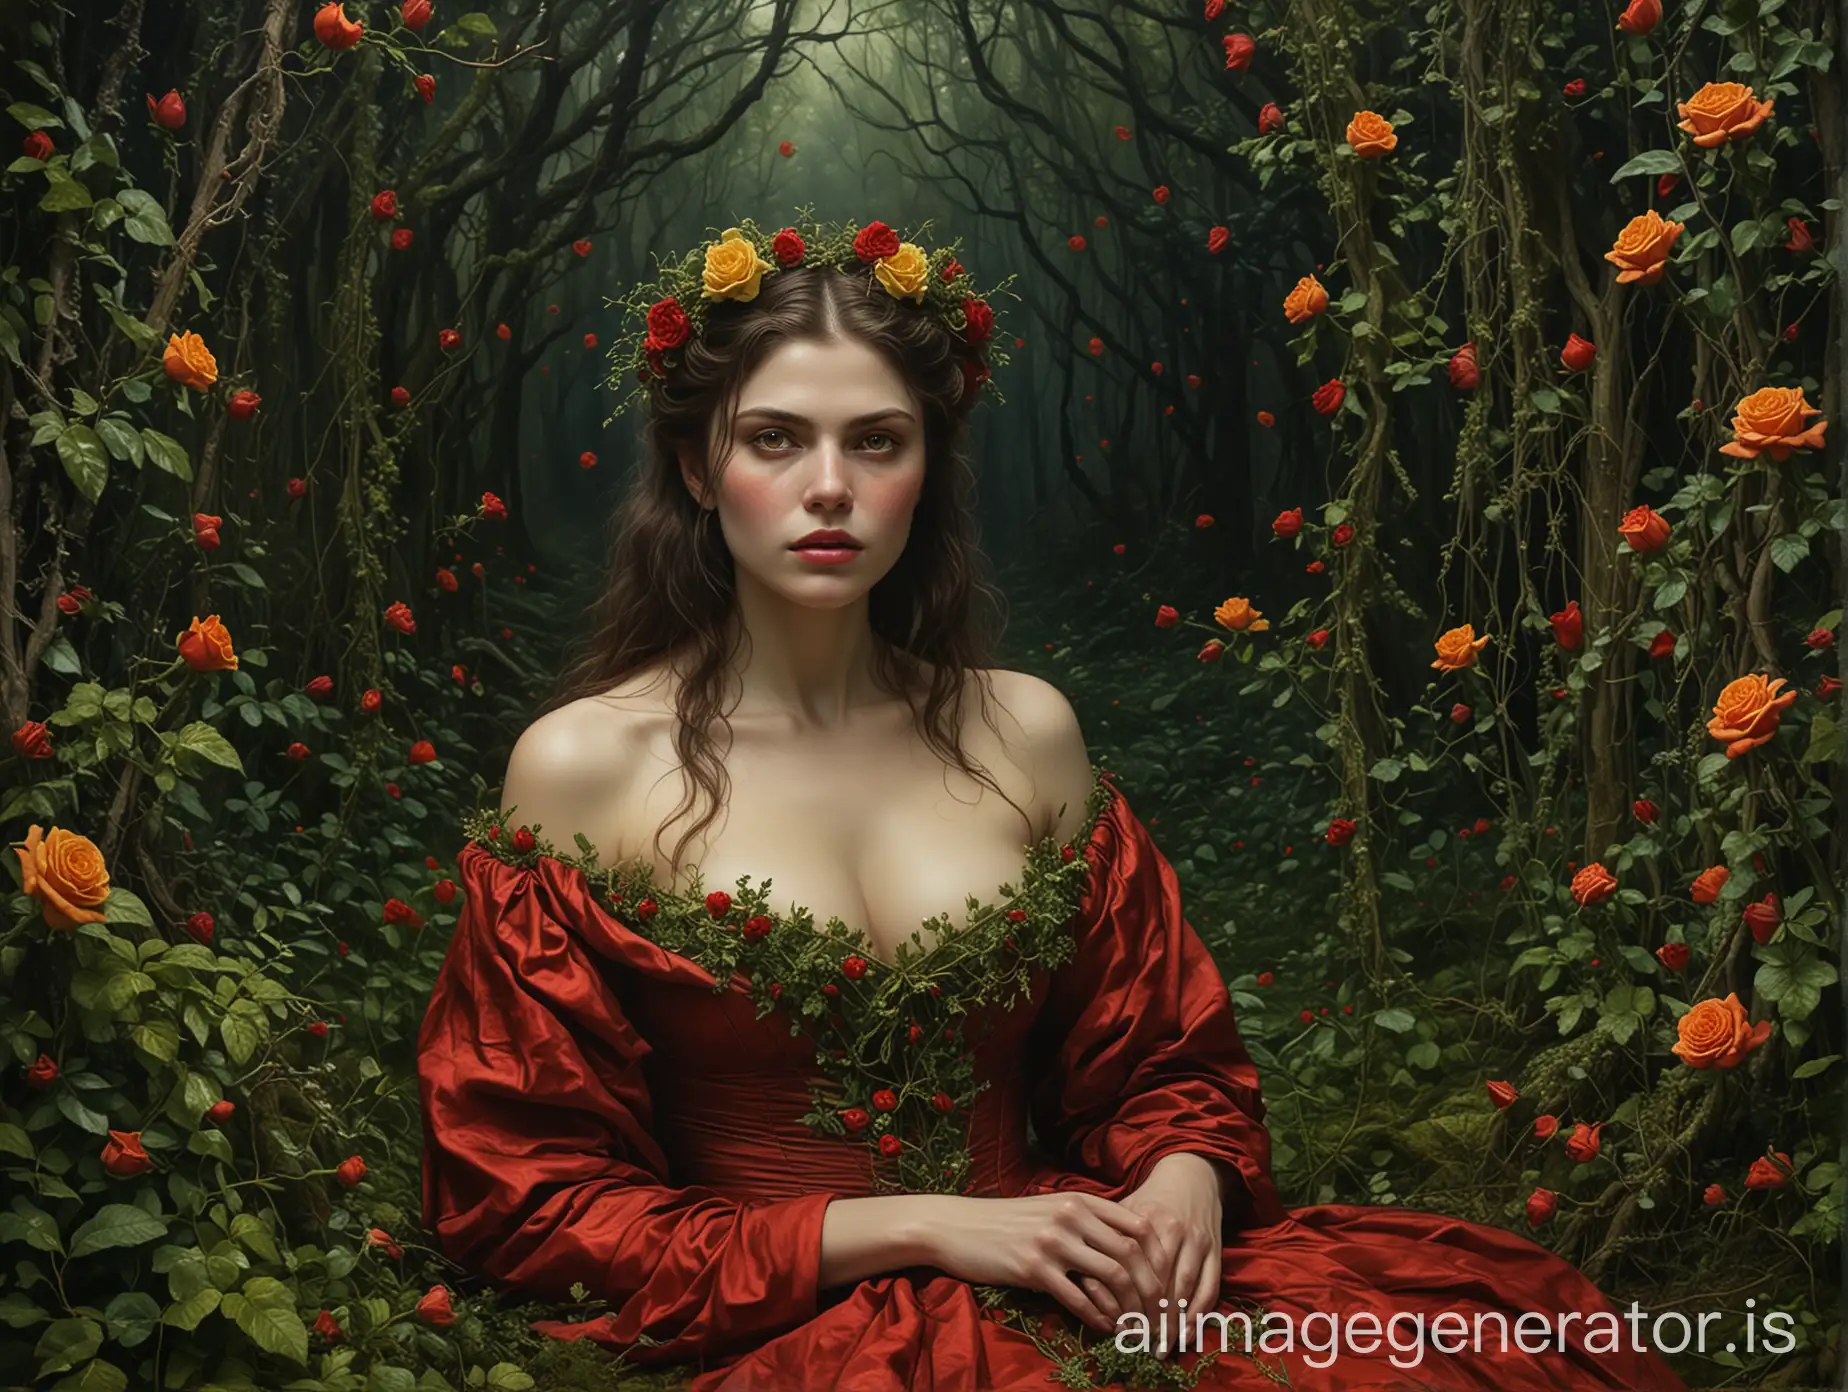 A surrealistic oil painting, reminiscent of late-19th-century Symbolism, shows a woman with glowing yellow eyes, Alexandra Daddario face. She is sitting on the mossy ground. Her body is tightly enshrouded in emerald green vines with thorns, punctuated by red roses. The same blend of thorns, green veins, and red roses emerge from her hair, which is an awe-inspiring display of nature and transformation. These natural elements seep into everything, wrapping even the darkest corners, and patrons are ensnared in this stunning spectacle. The lady is garbed in a full-length vermilion gown which contributes to the visual drama, and her hand gracefully navigates through the bramble in a daring move. Behind this spectacle, a dark forest adds an integral backdrop, cloaking everything in mystery and intrigue.